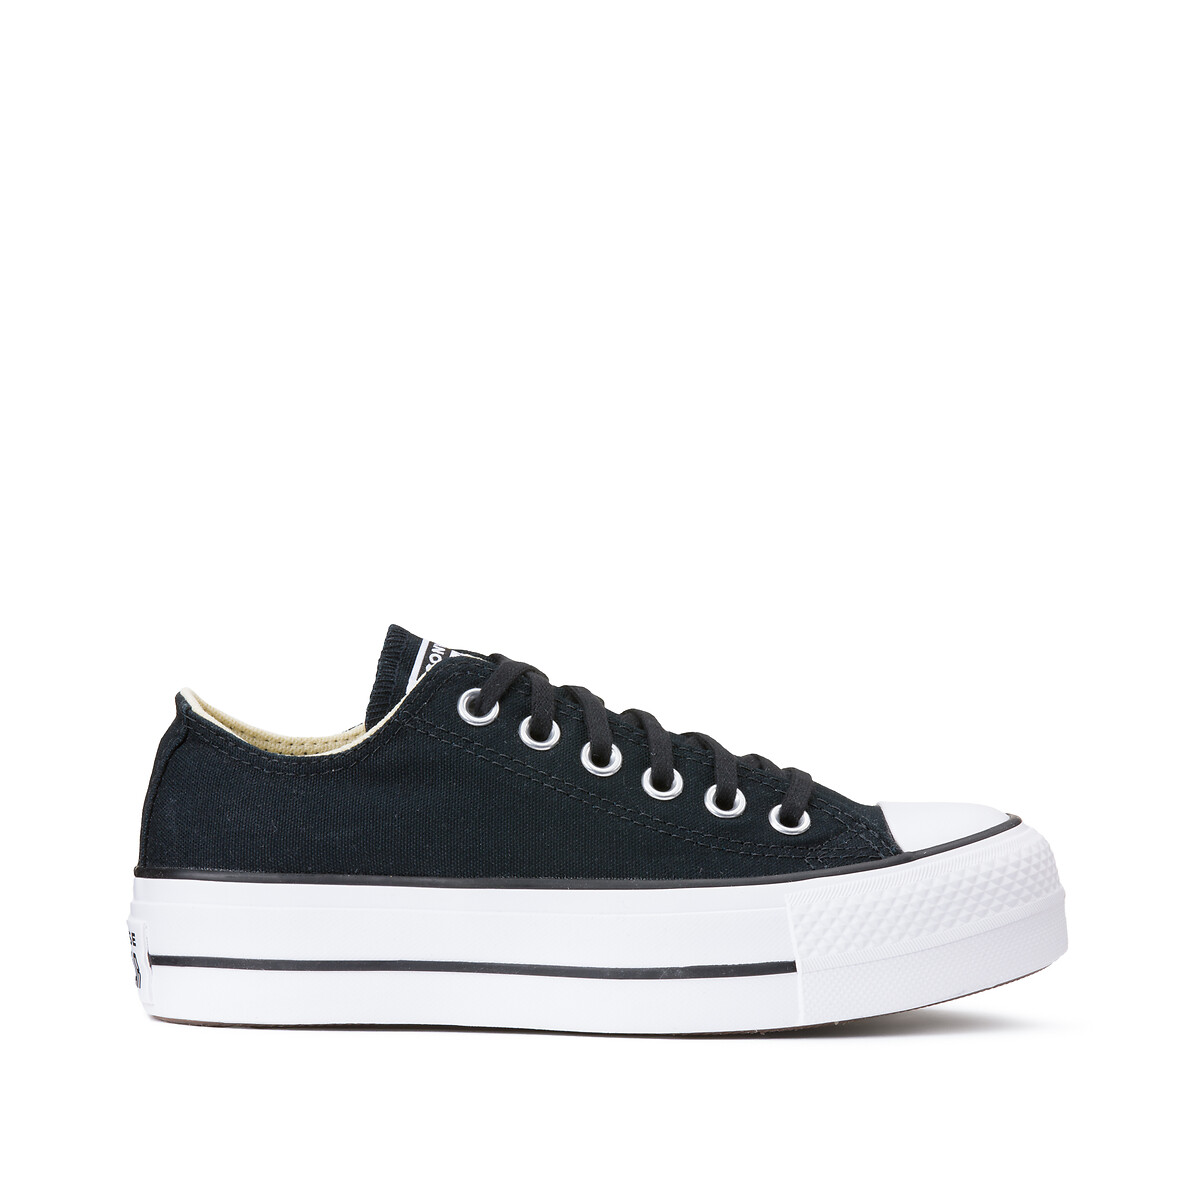 Image of Chuck Taylor All Star Lift Canvas Ox Flatform Trainers